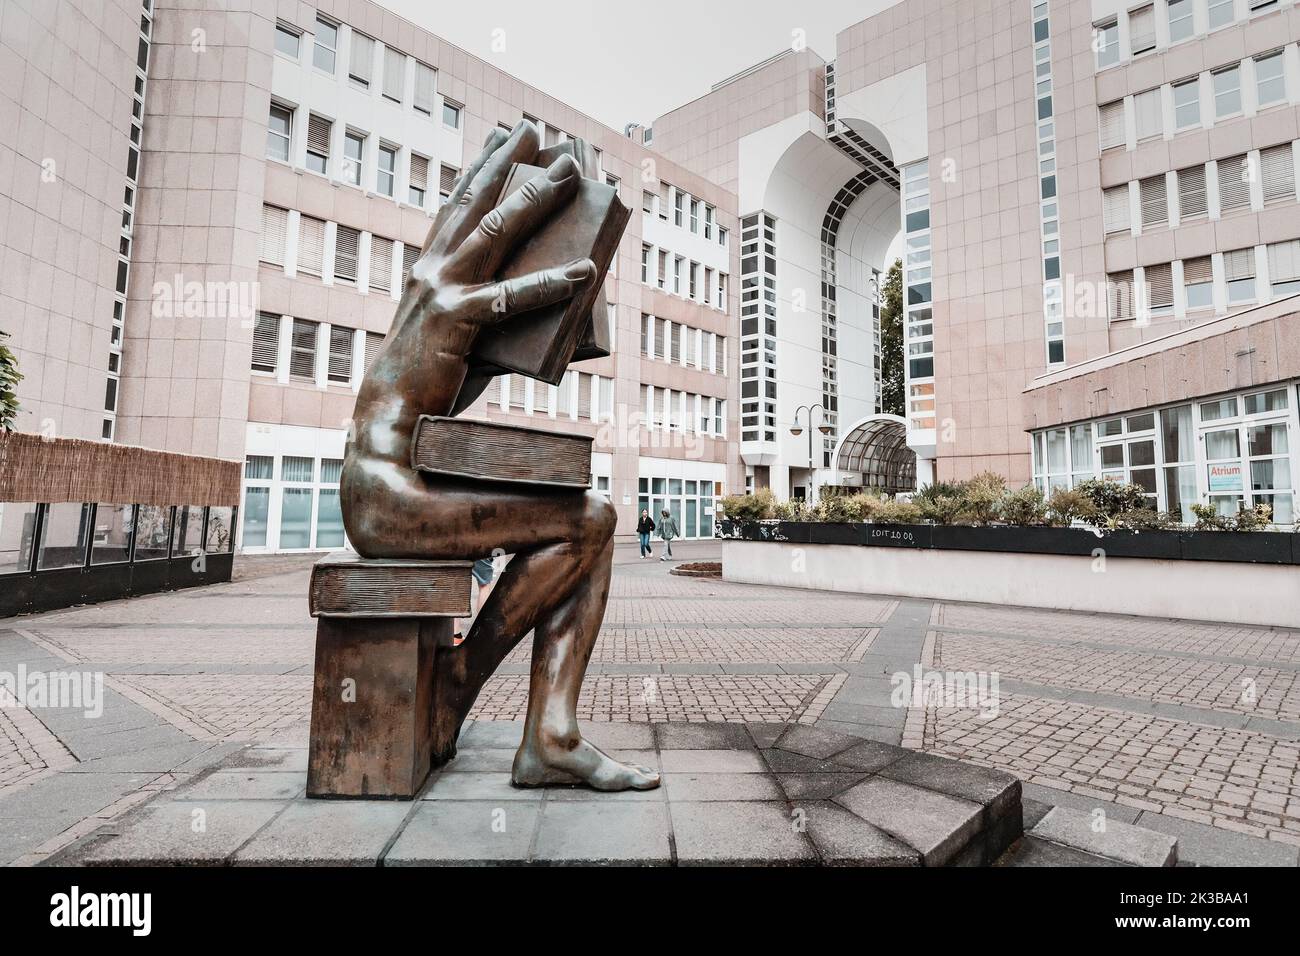 21 July 2022, Dusseldorf, Germany: Monument or sculpture dedicated to books and reading near library Stock Photo